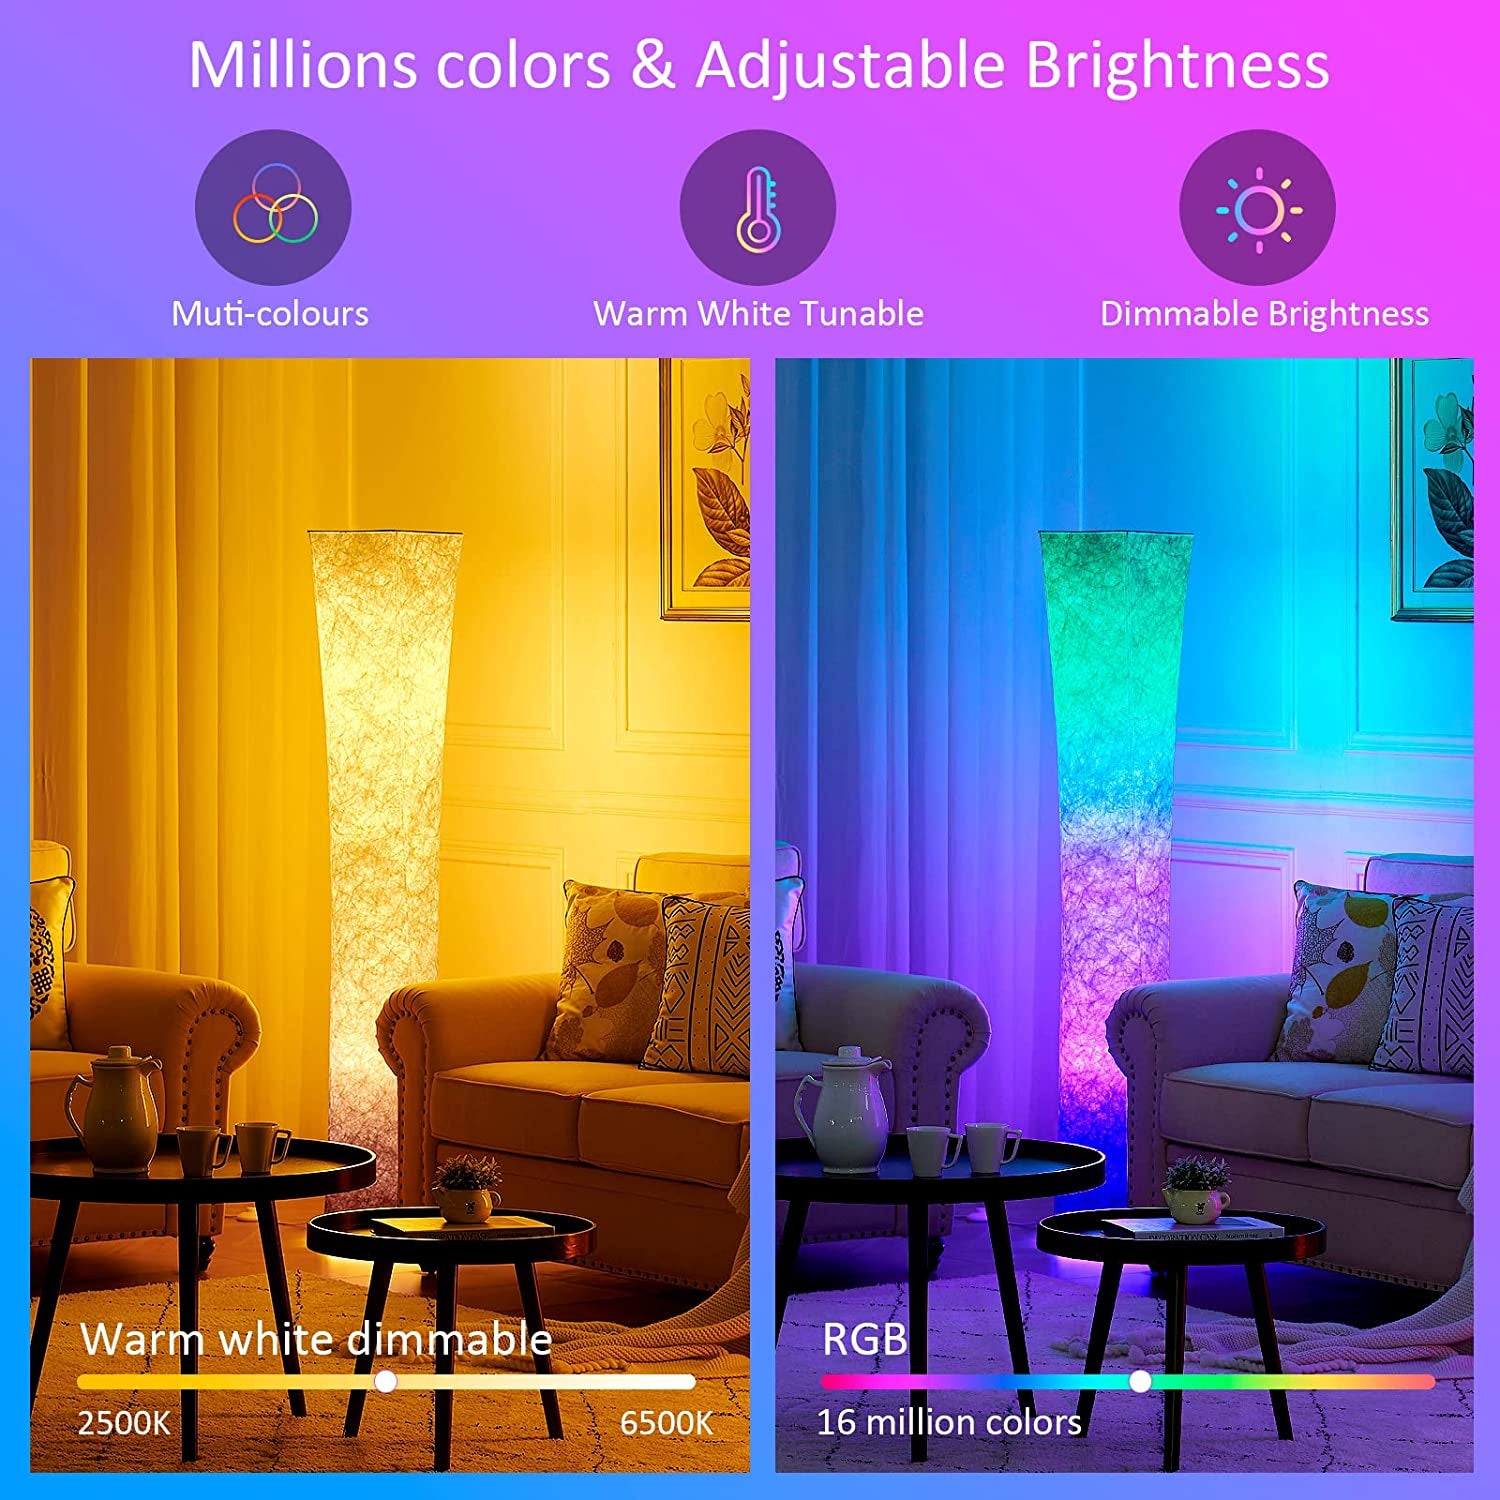 Floor Lamp for Living Room, 64"(XL) Standing Lamp, RGB Color Changing LED Bulbs, Adjustable Brightness Color Temperature, Red Fabric Lampshade, Remote Control, for Bedroom Kids Room Play Room